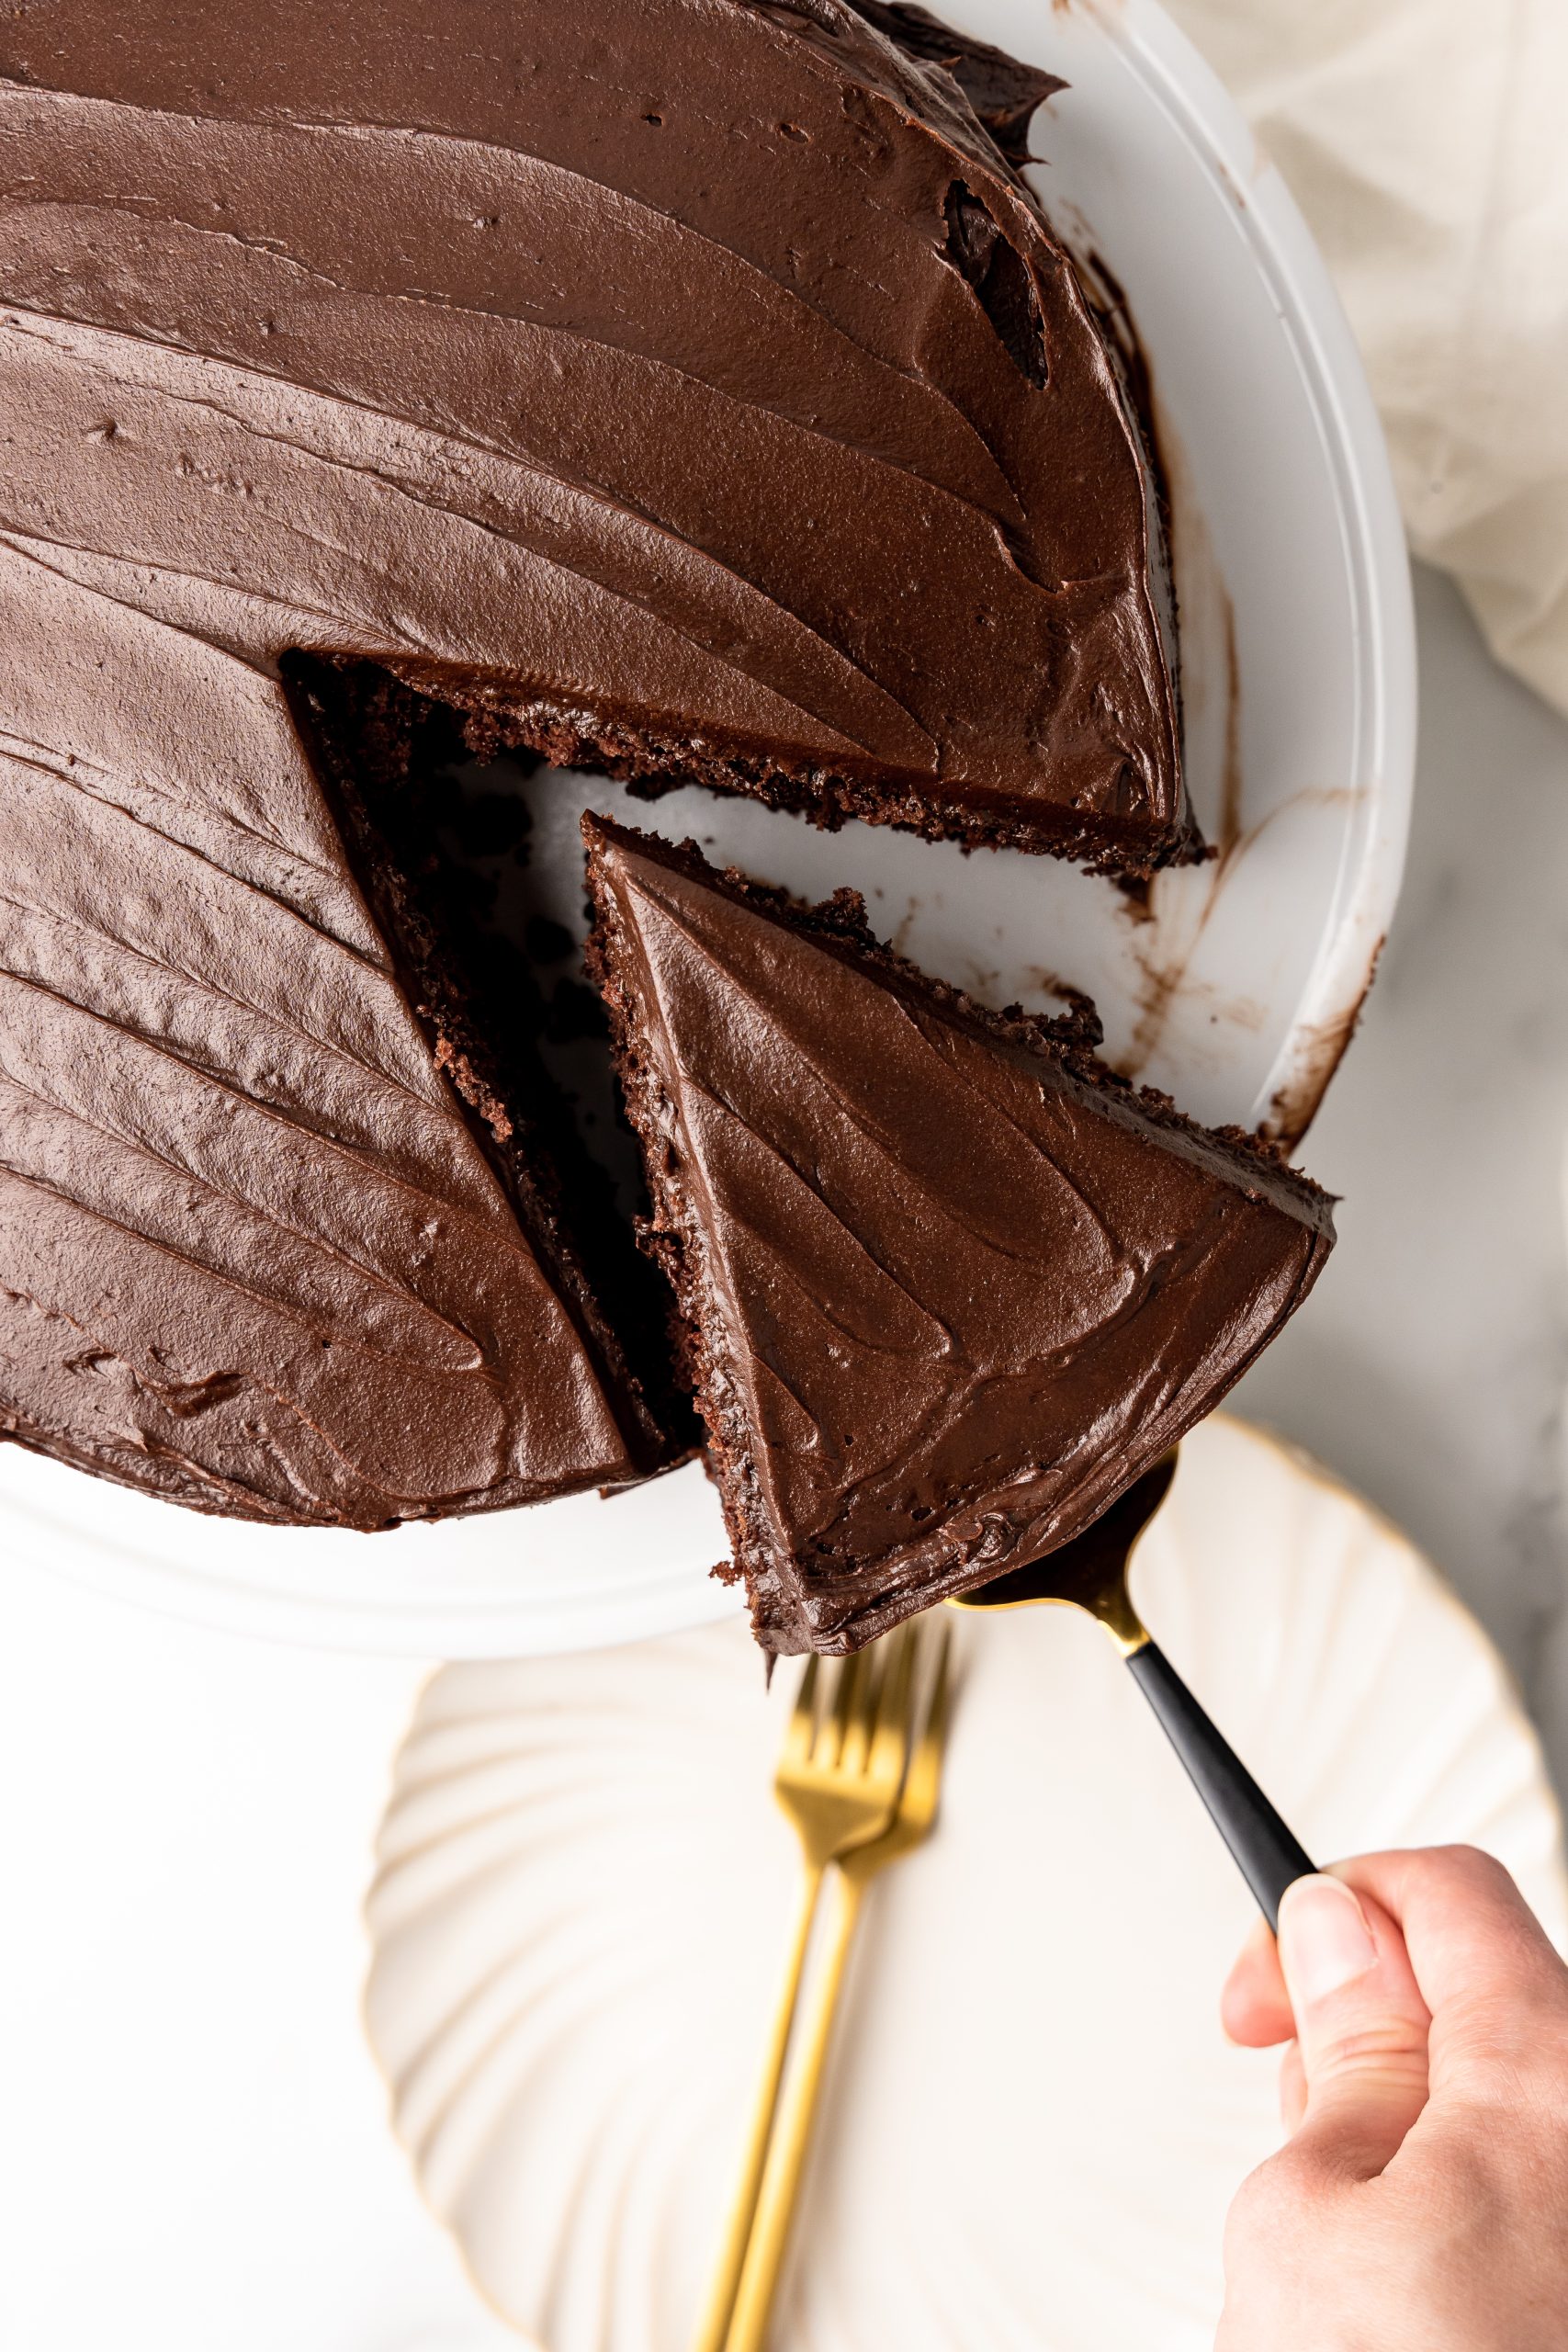 a cake server removing a slice of frosted chocolate church cake from a white pedestal